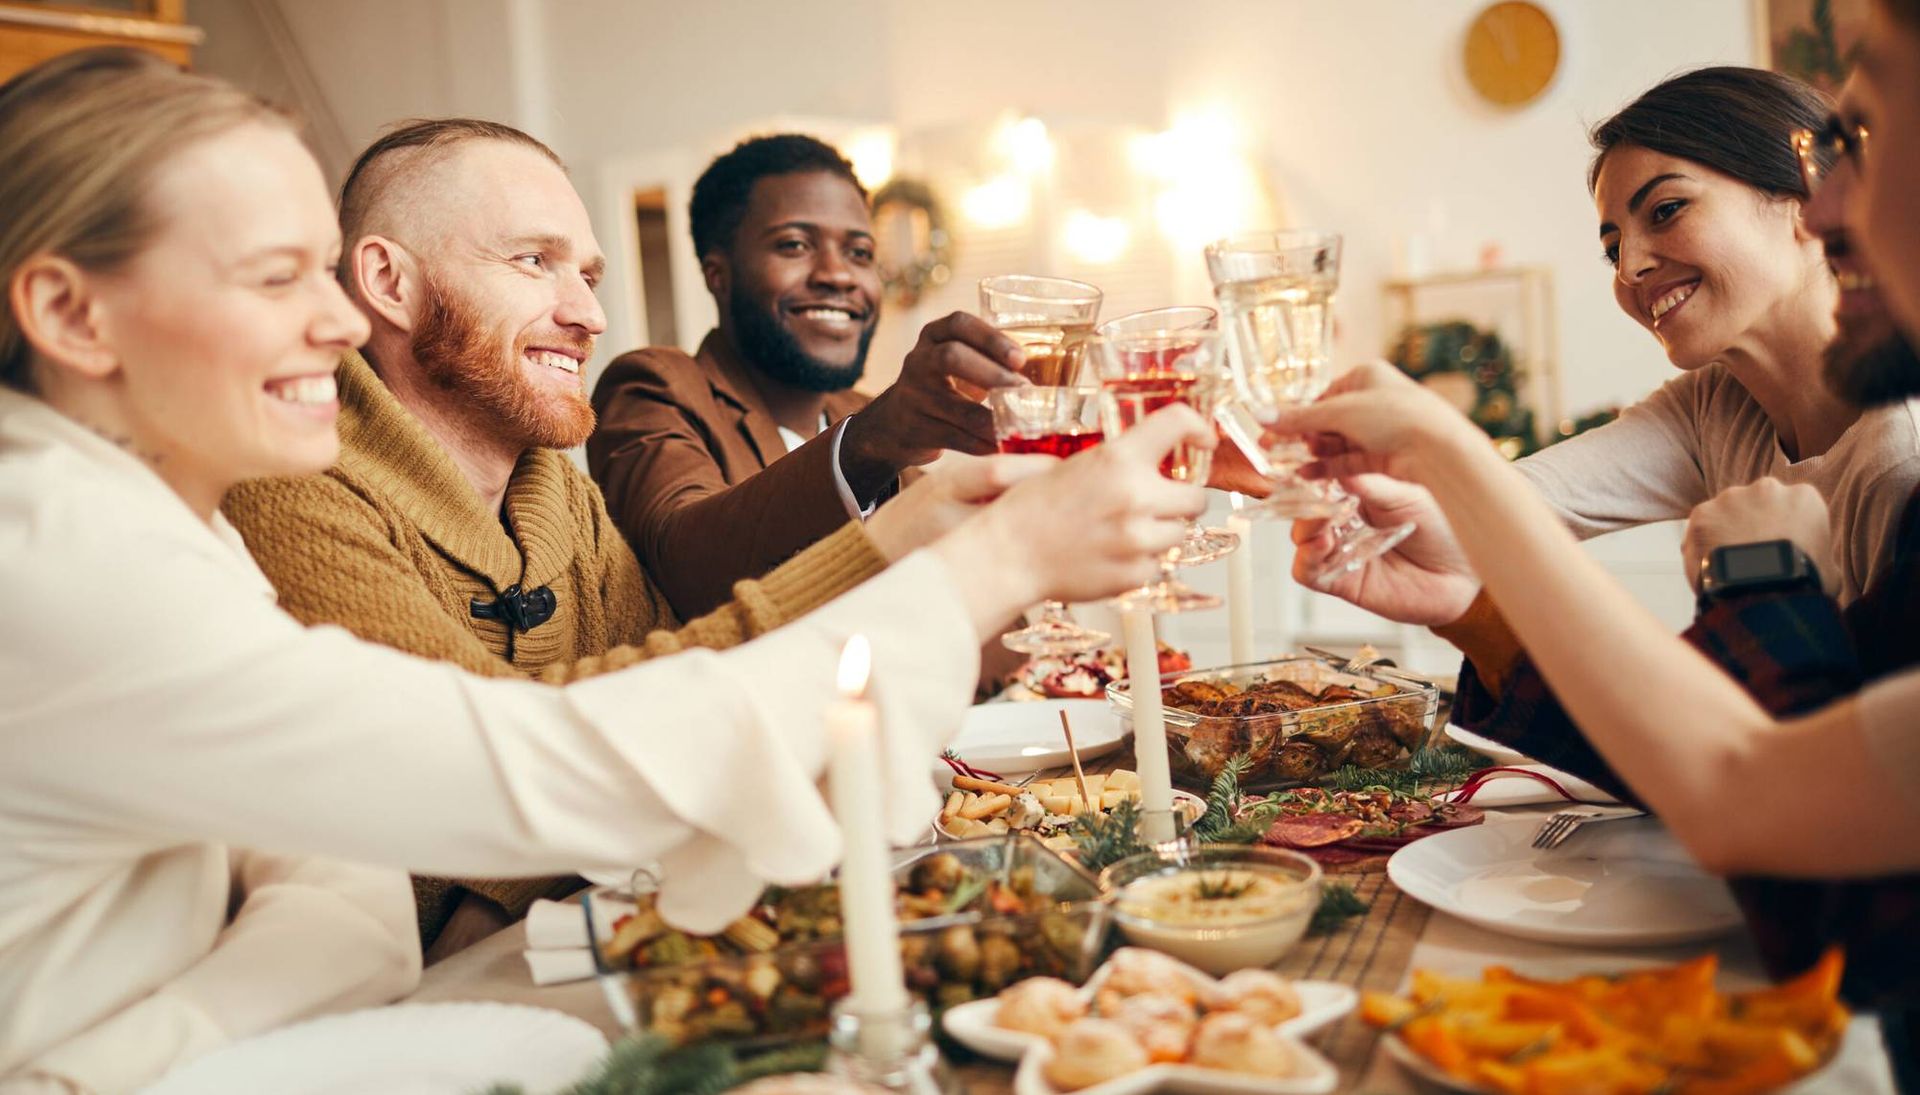 Multi-ethnic group of people raising glasses sitting at beautiful dinner table celebrating Christmas with friends and family